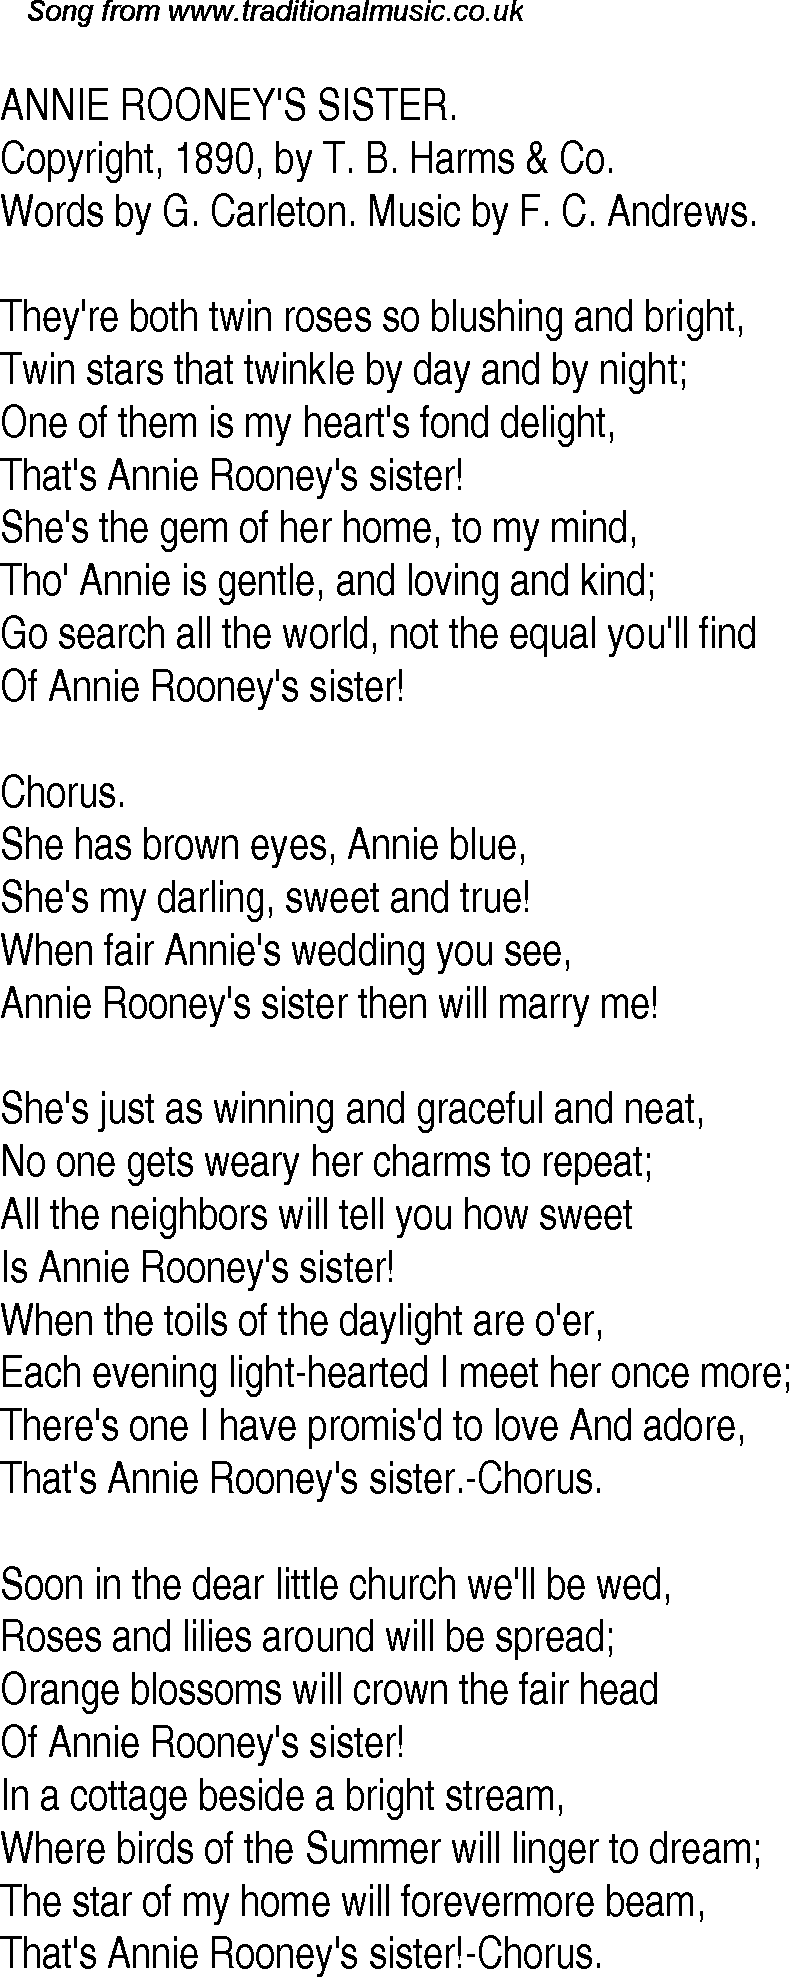 Old Time Song Lyrics for 26 Annie Rooneys Sister